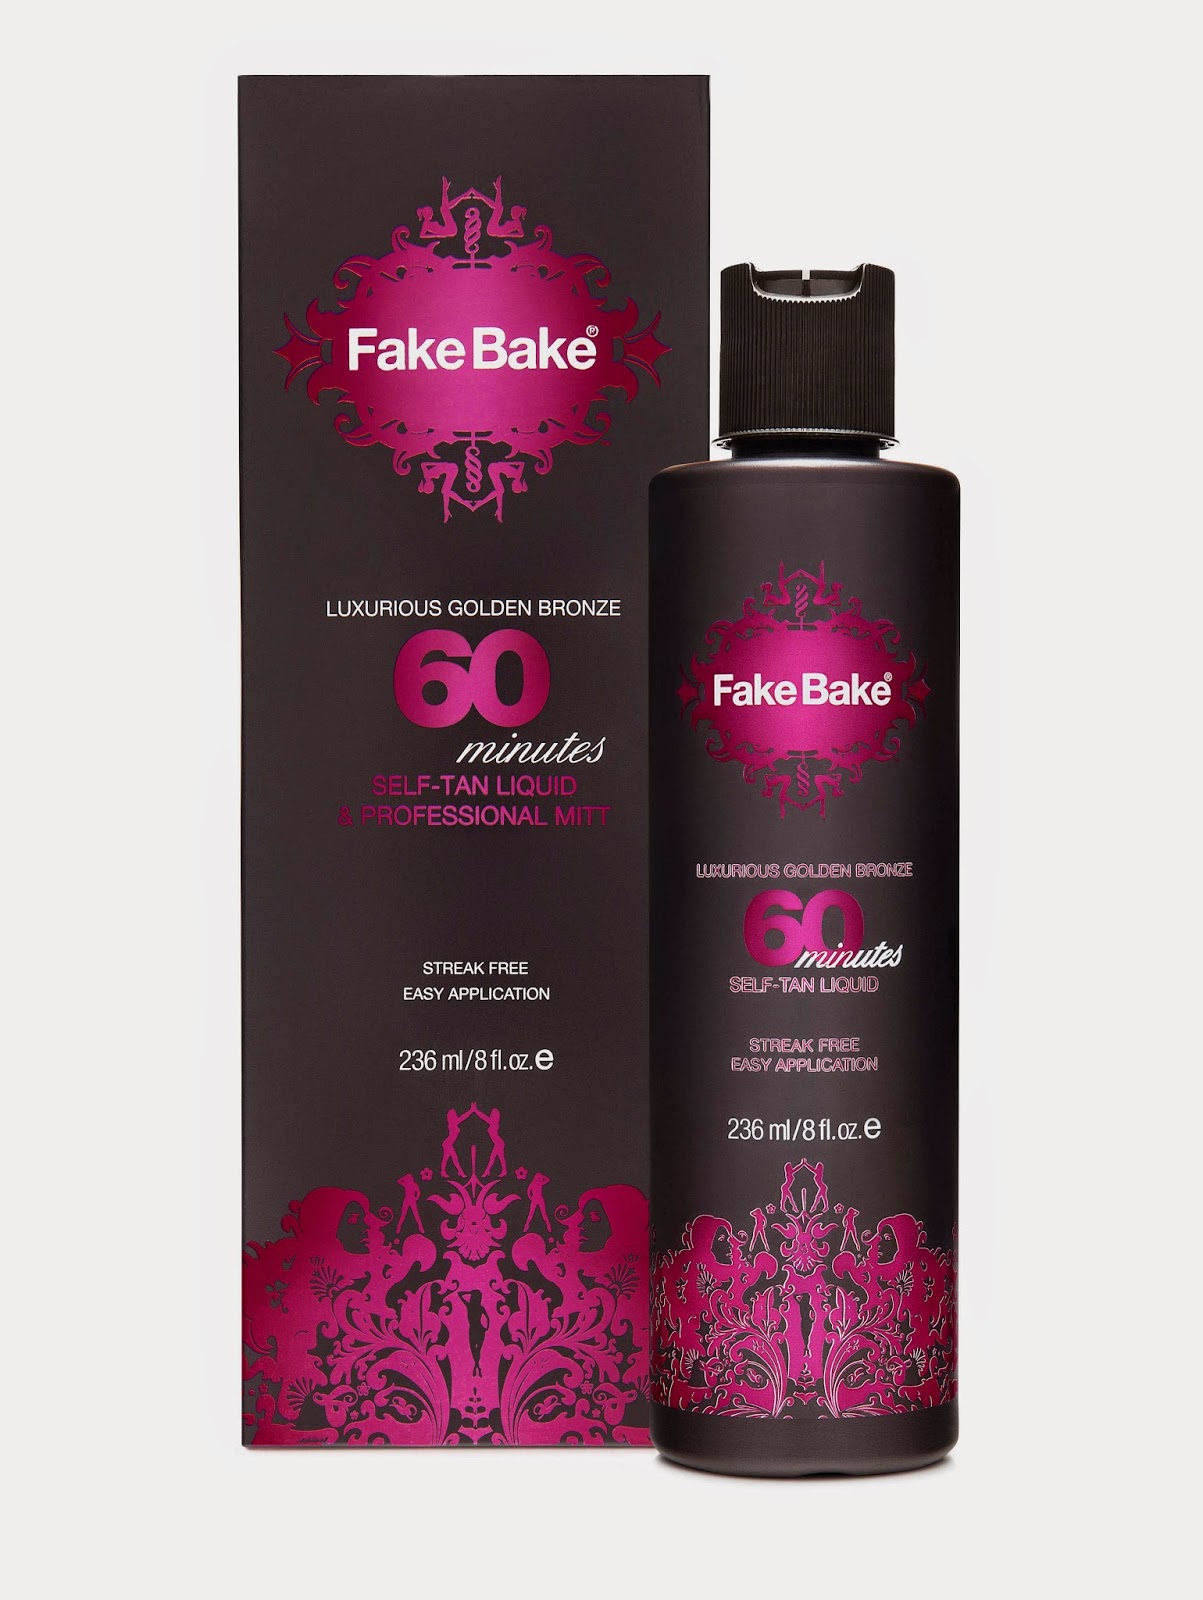 LouLouLand: A Review Of The Fake Bake 60 Minute Self Tan Liquid*